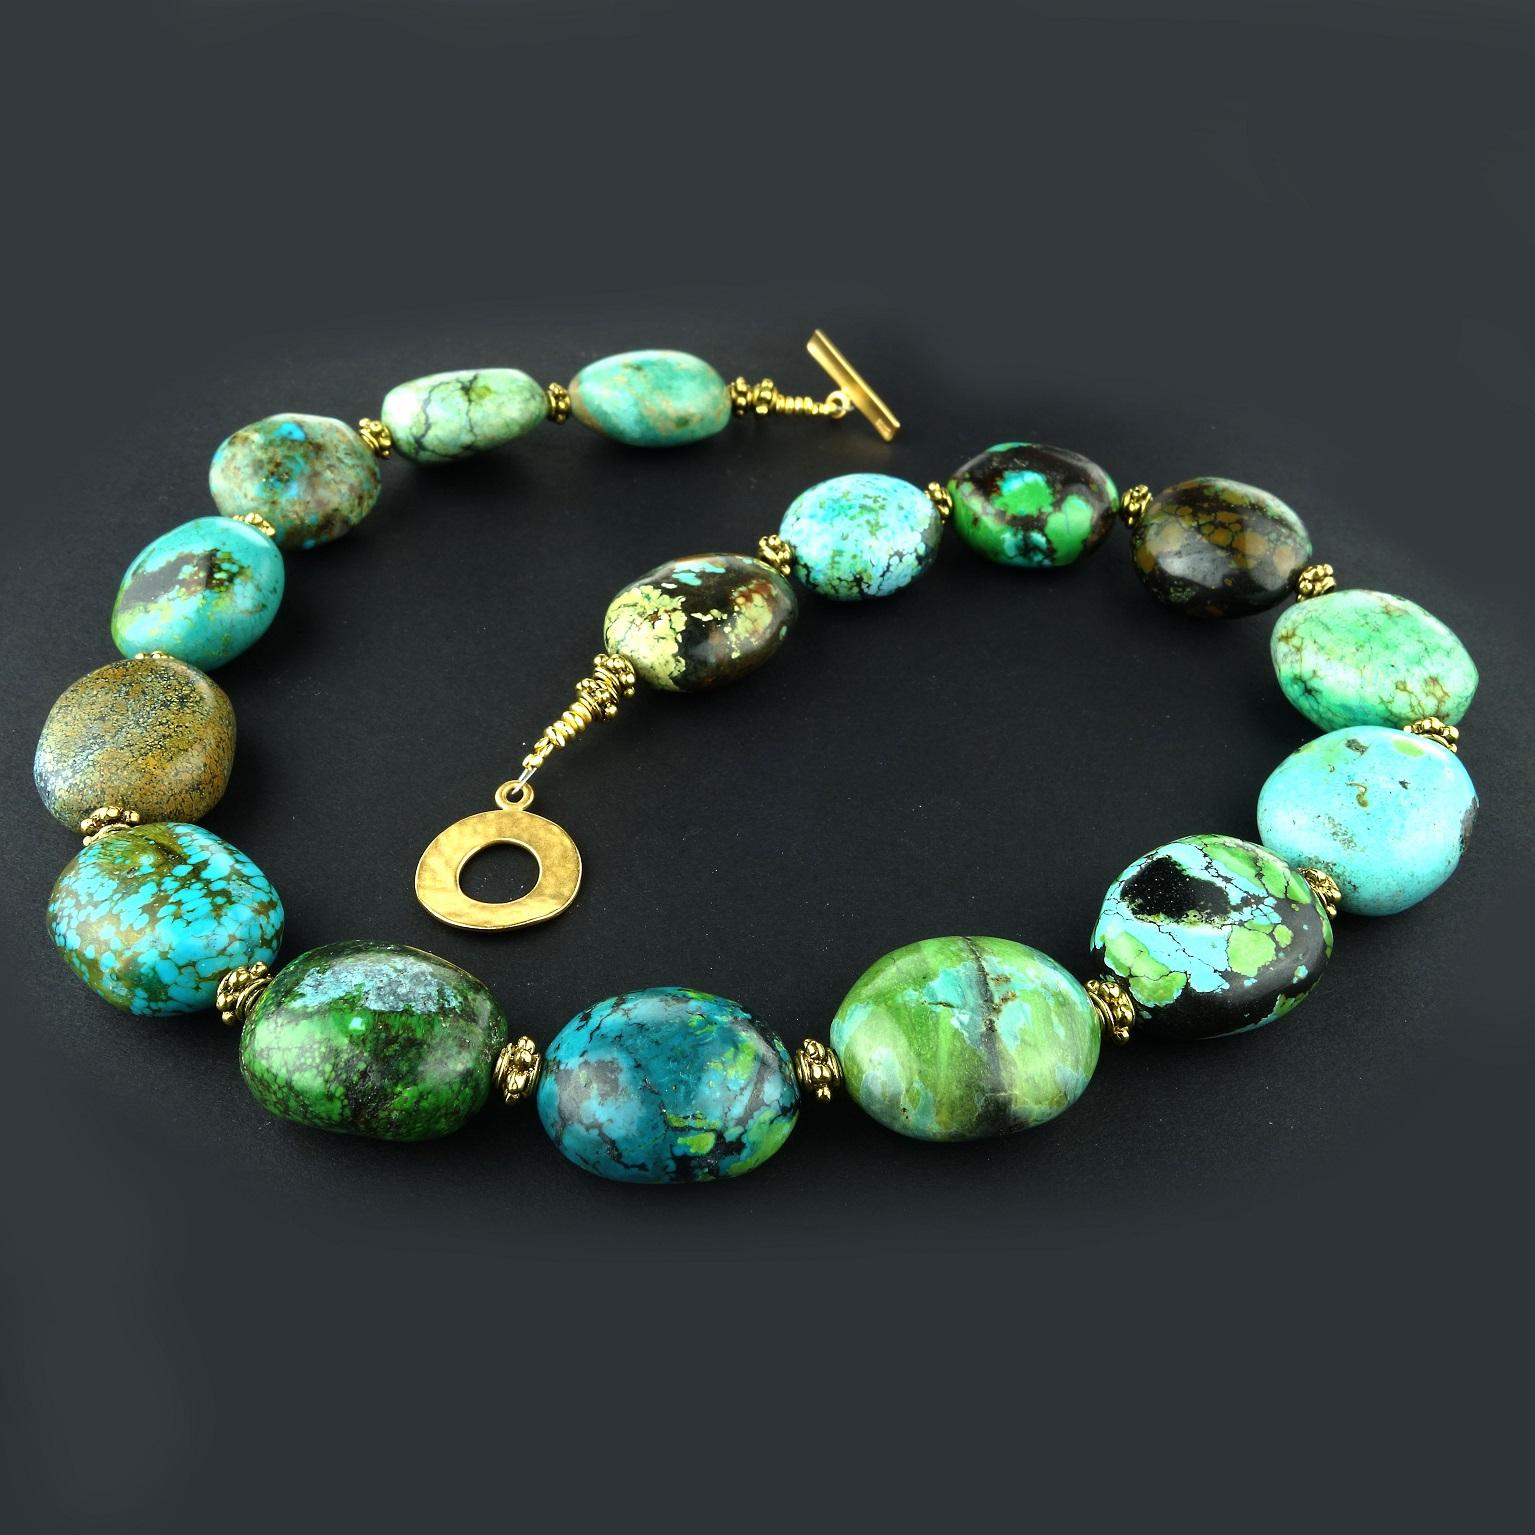 Custom made necklace of highly polished Turquoise nuggets in rich shades of blue and green laced with matrix.  Each of these nuggets is a fantastic landscape of color and design.  The 21x19MM nuggets are accented with detailed brass toned spacers